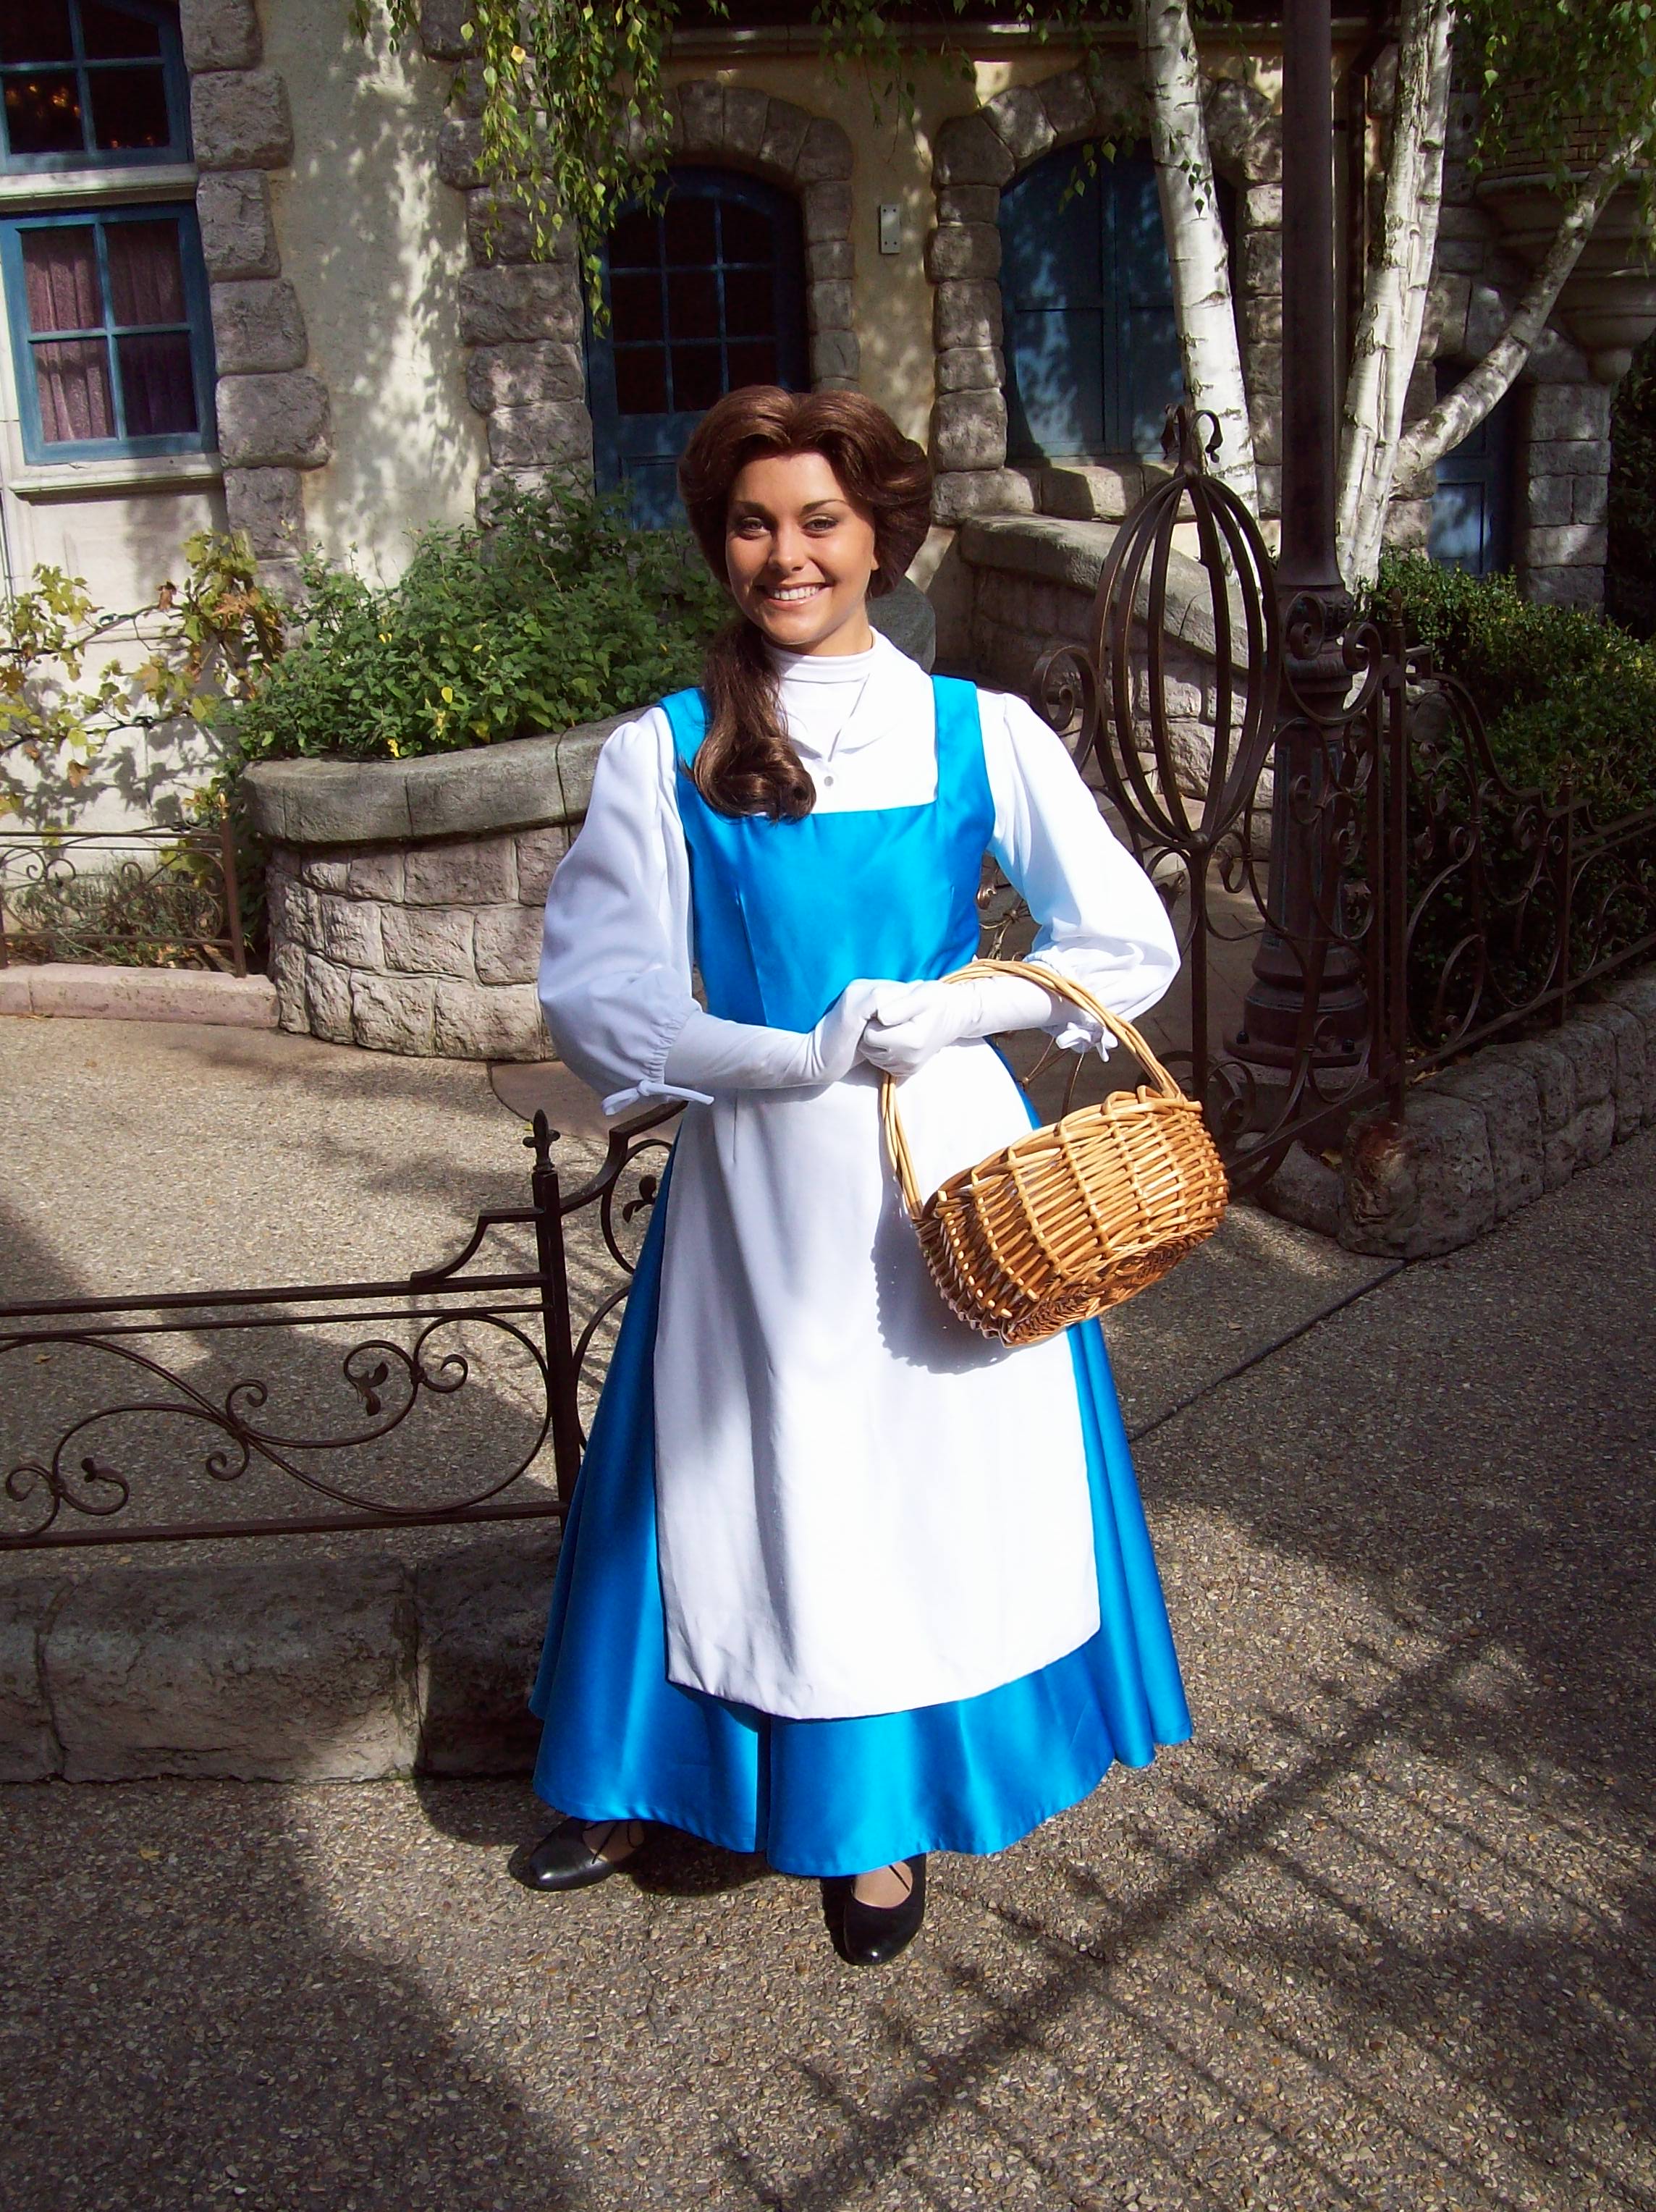 Belle in her village outfit. She used to walk around Fantasyland but nowadays does Meet'n'Greets at the Princess Pavilion.